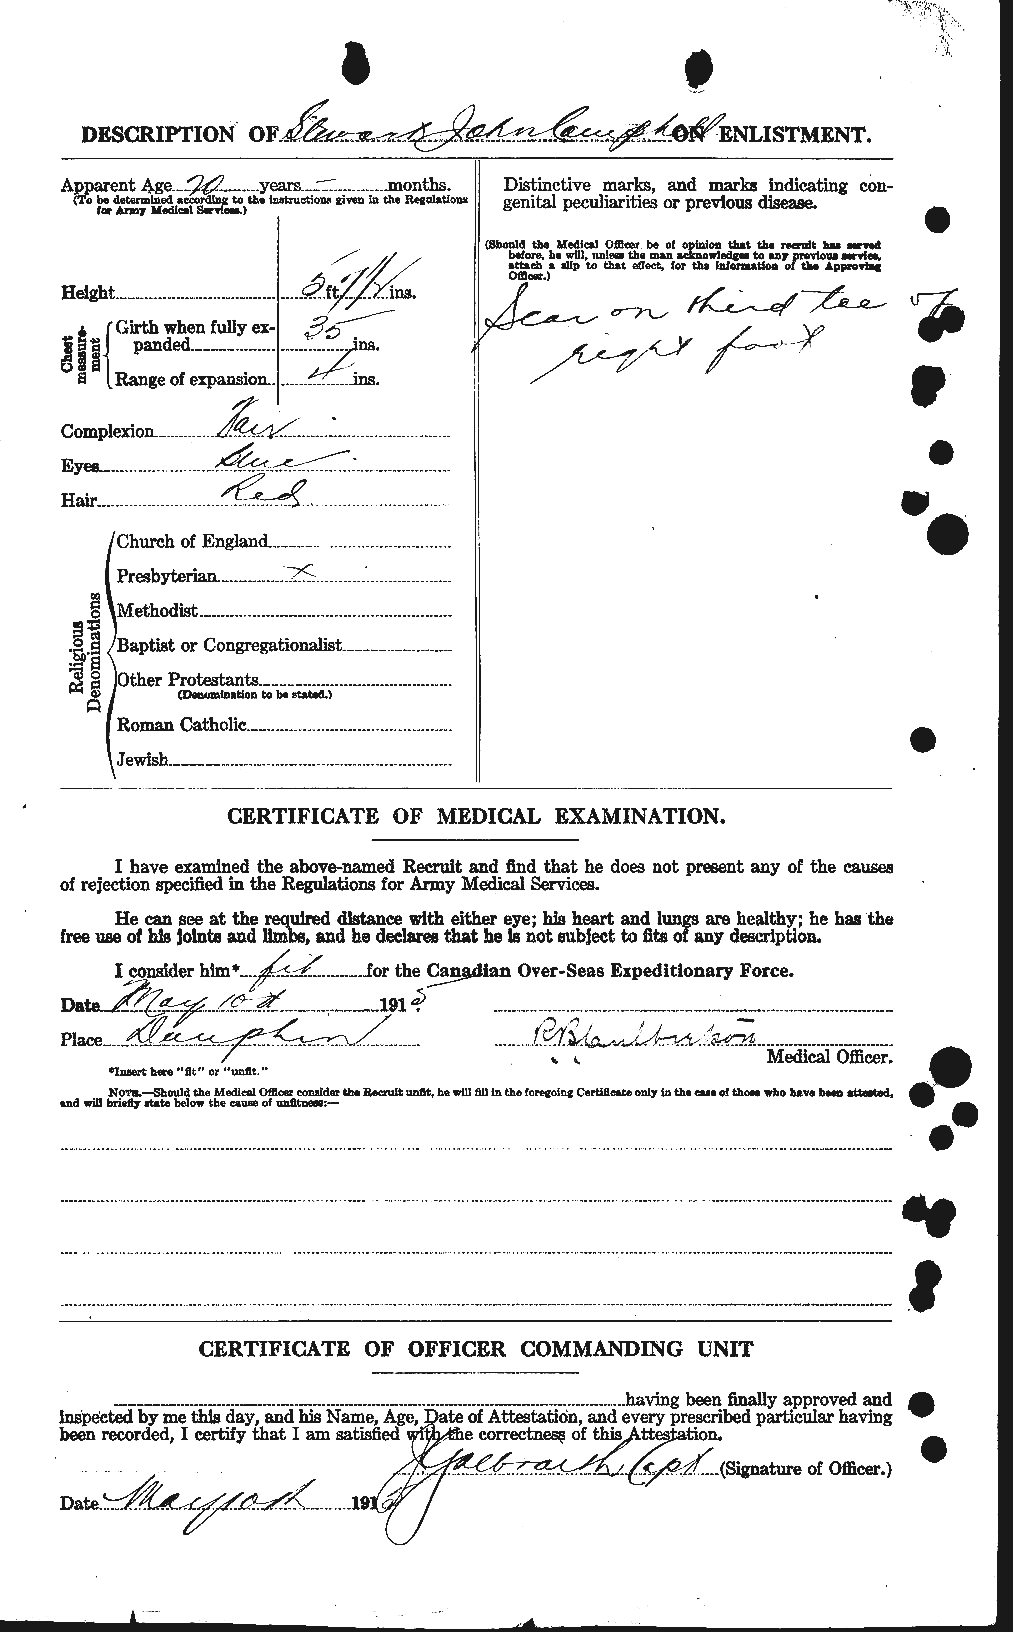 Personnel Records of the First World War - CEF 003993b